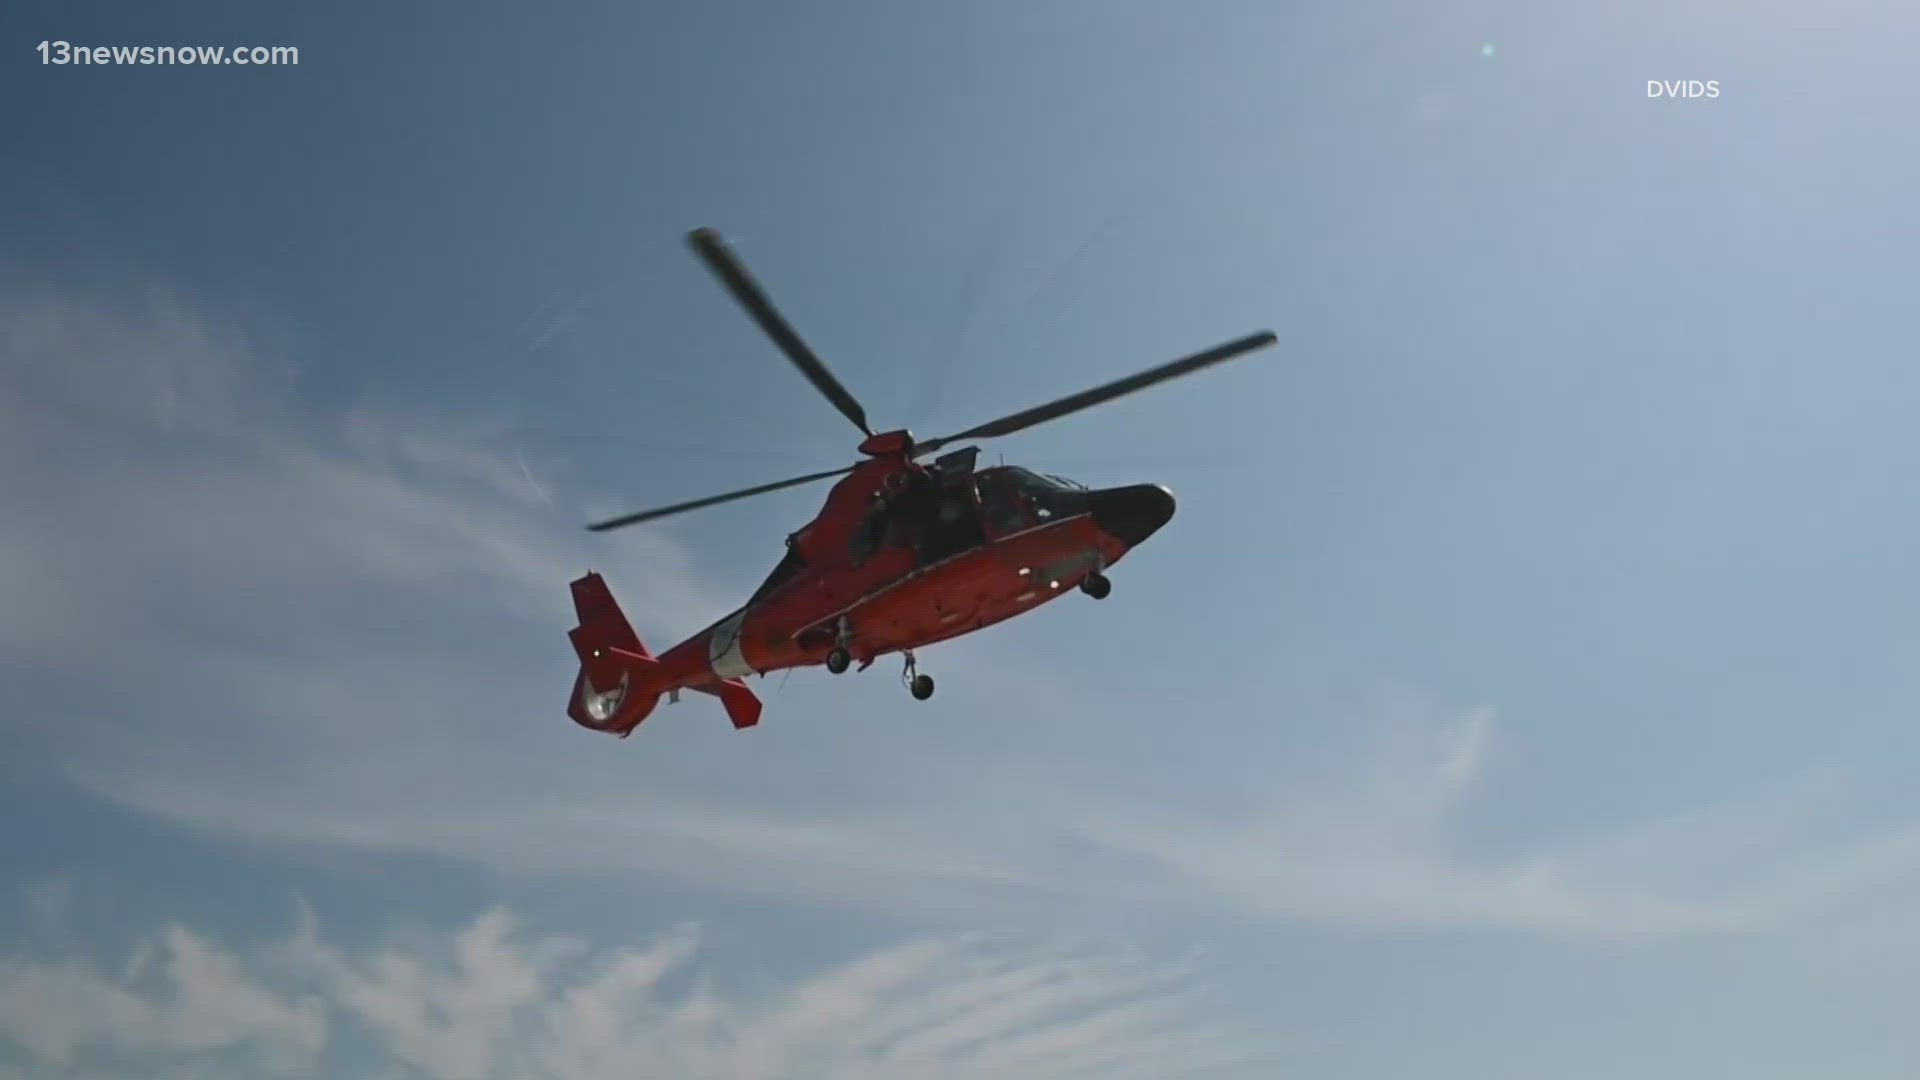 The USCG needs to do a better job to prepare for the downsizing of its helicopter fleet, according to a new report.